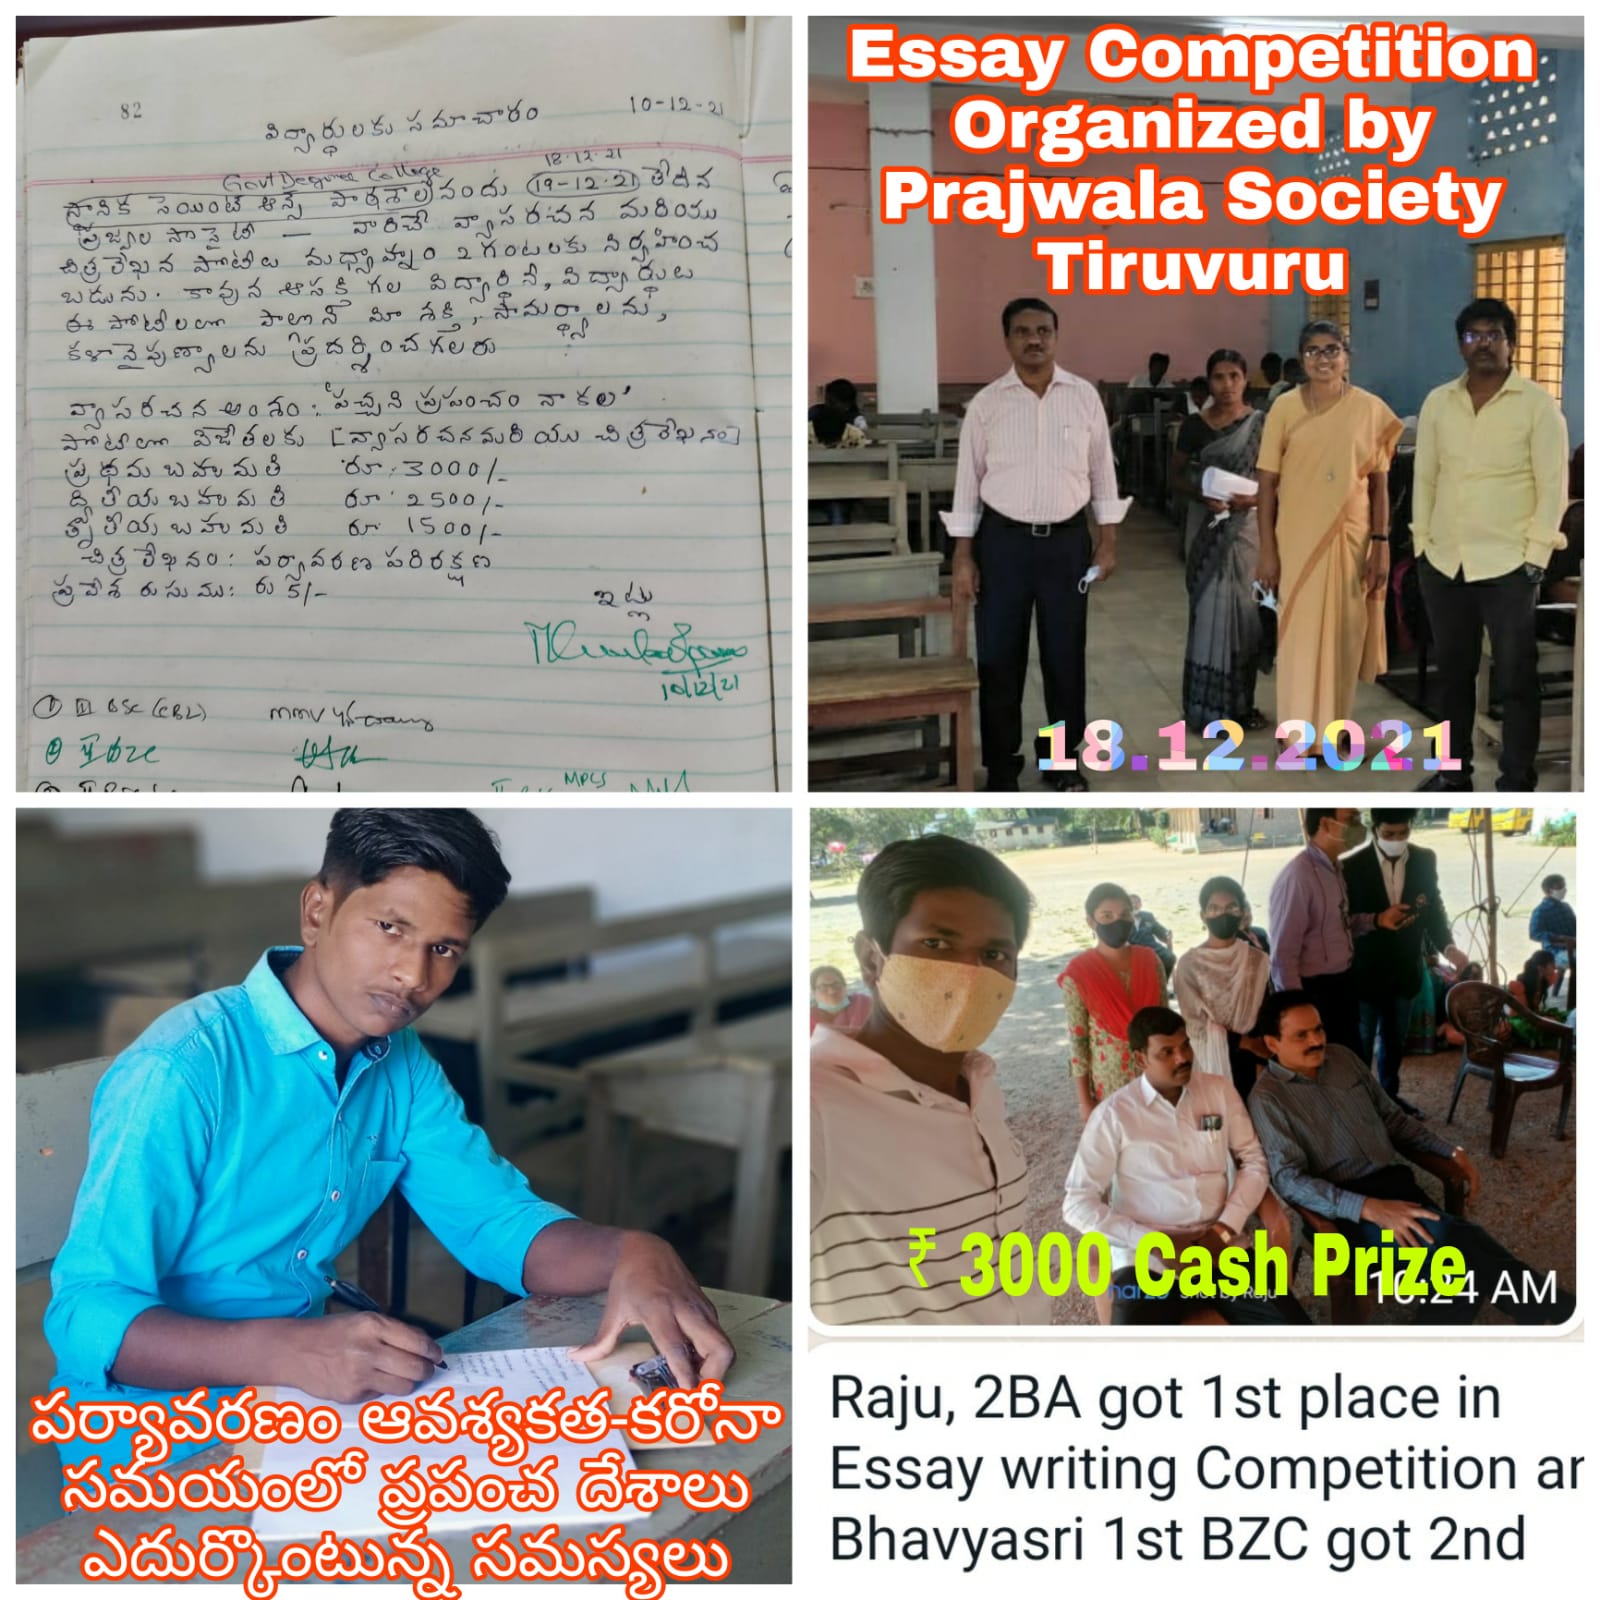 Essay writing  competition held on 18 Dec 21